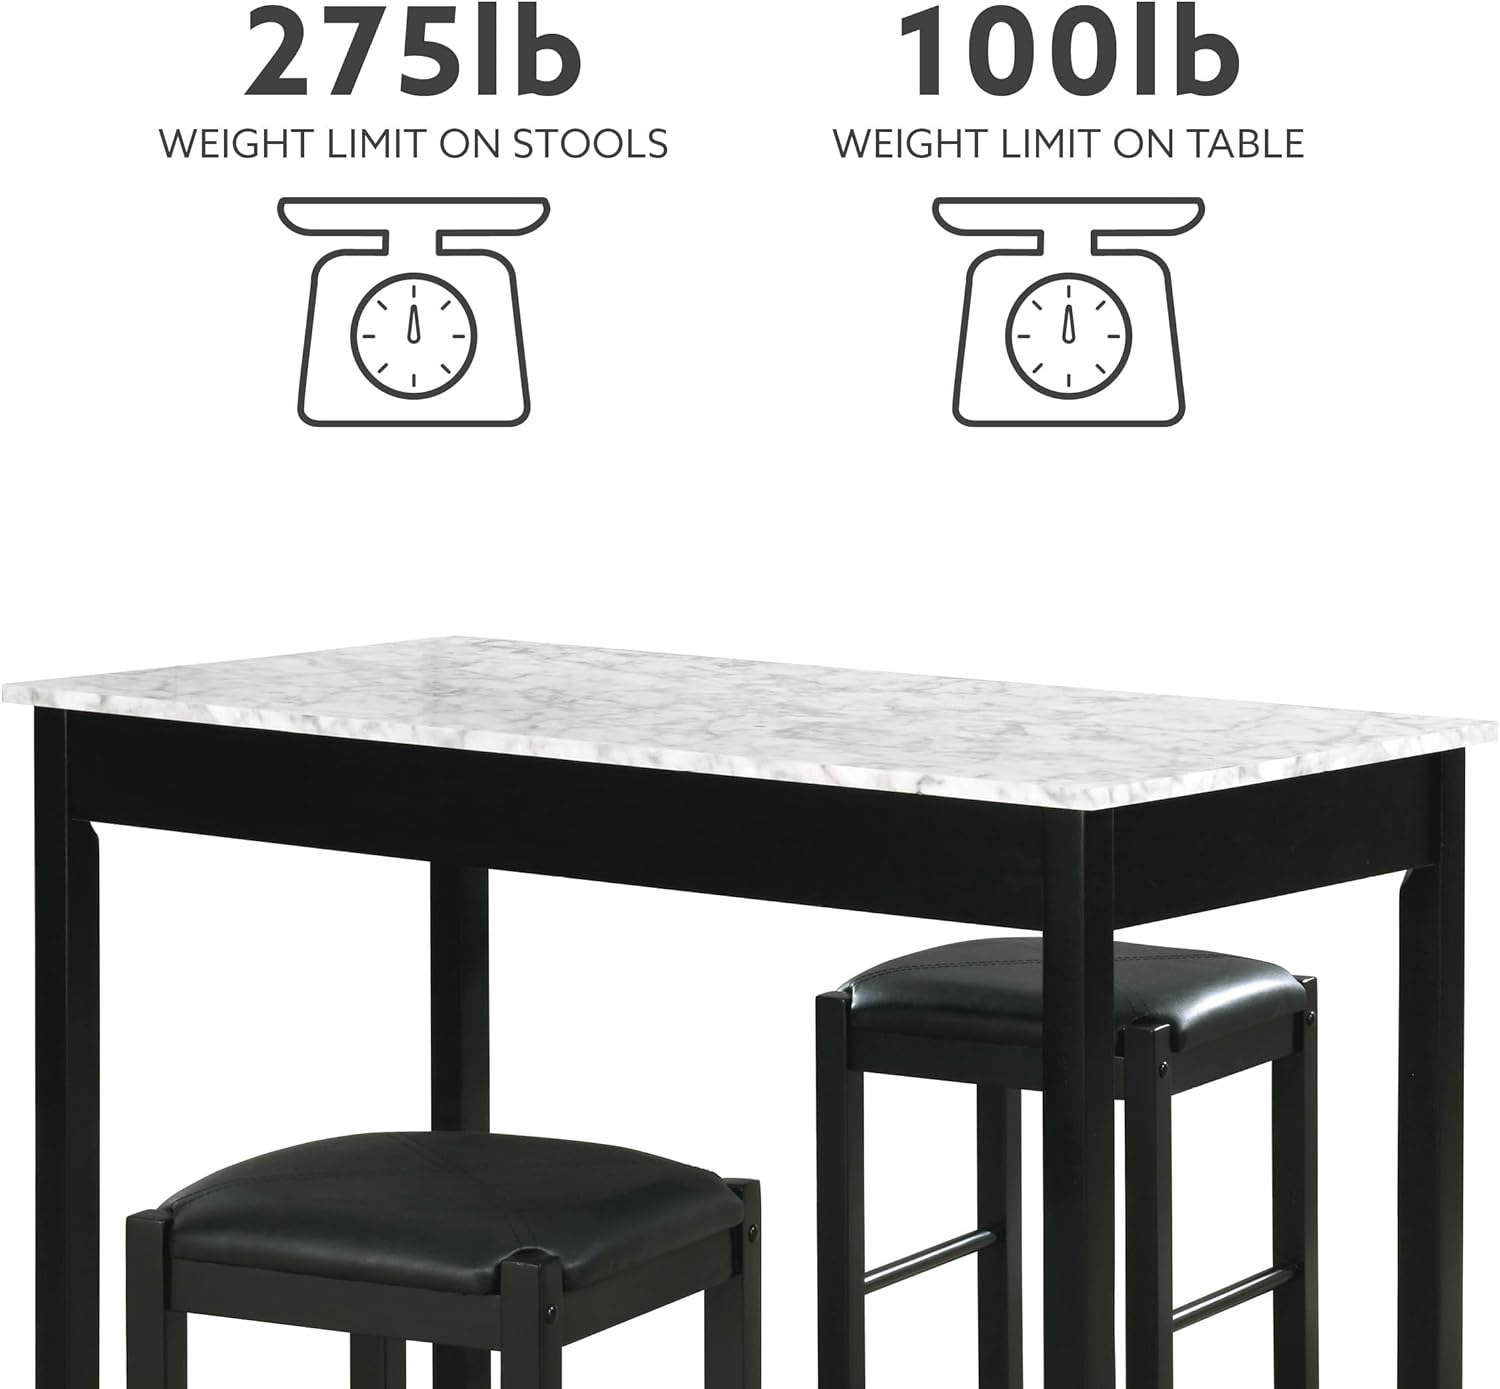 Linon Black Marble Dining Table weight limit